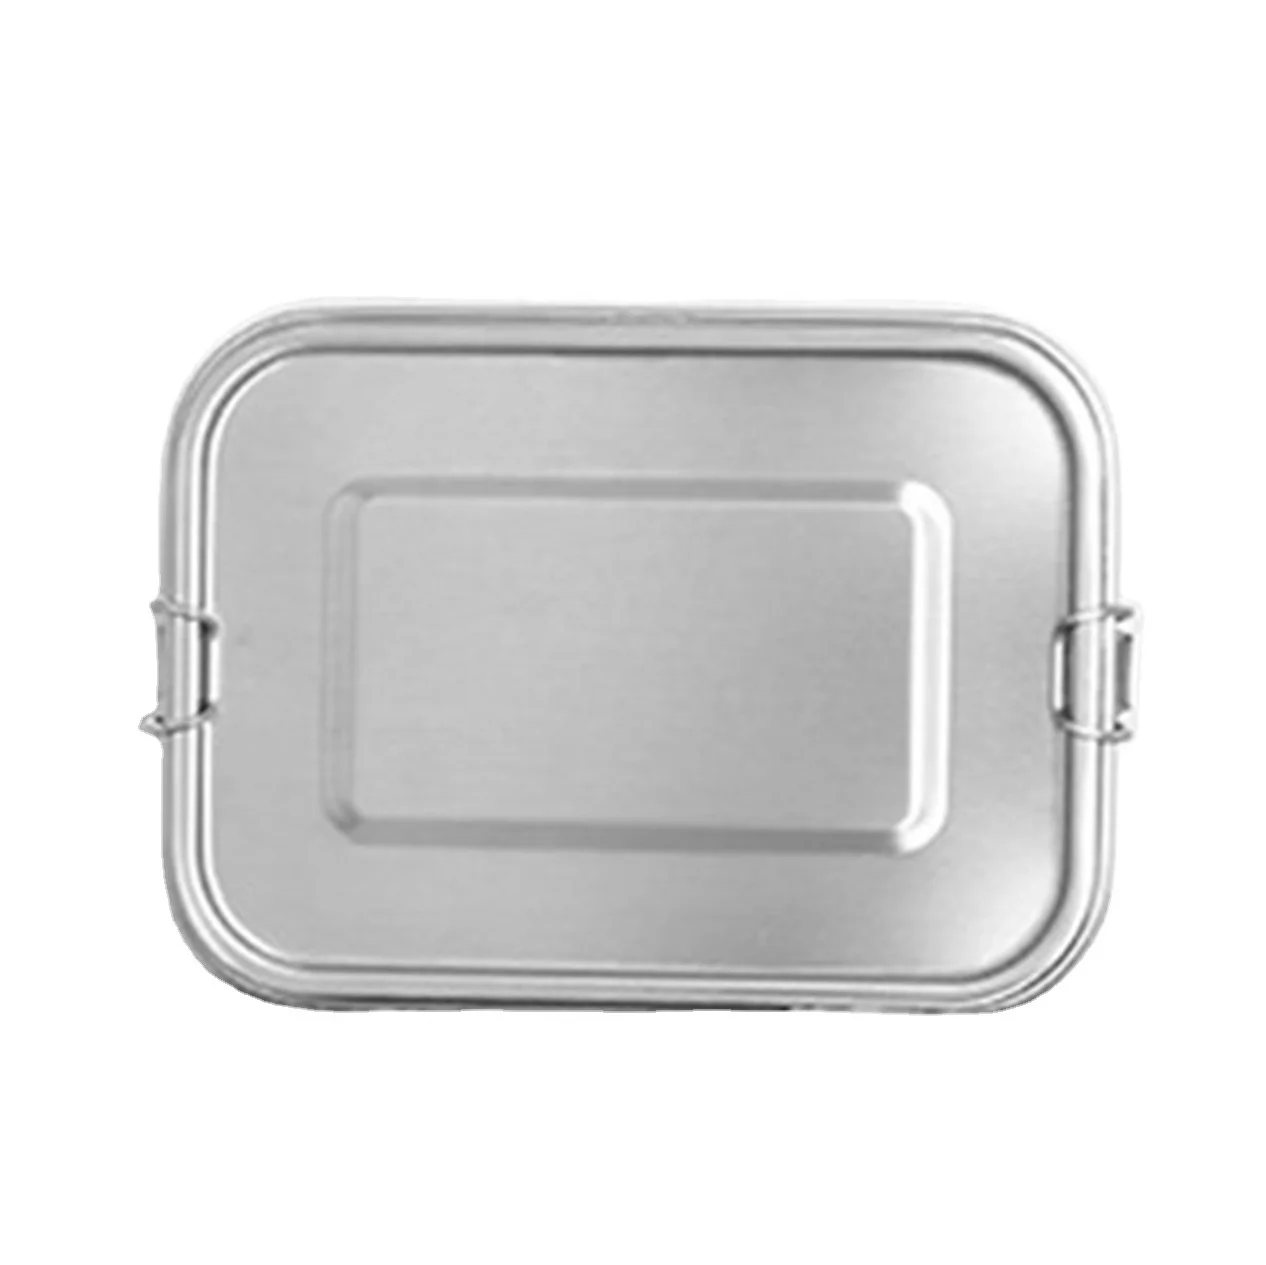 

Amazon Eco Friendly Thermal Kid Insulated School Lunch Box Leakproof Metal Bento 304 Stainless Steel steel tiffin